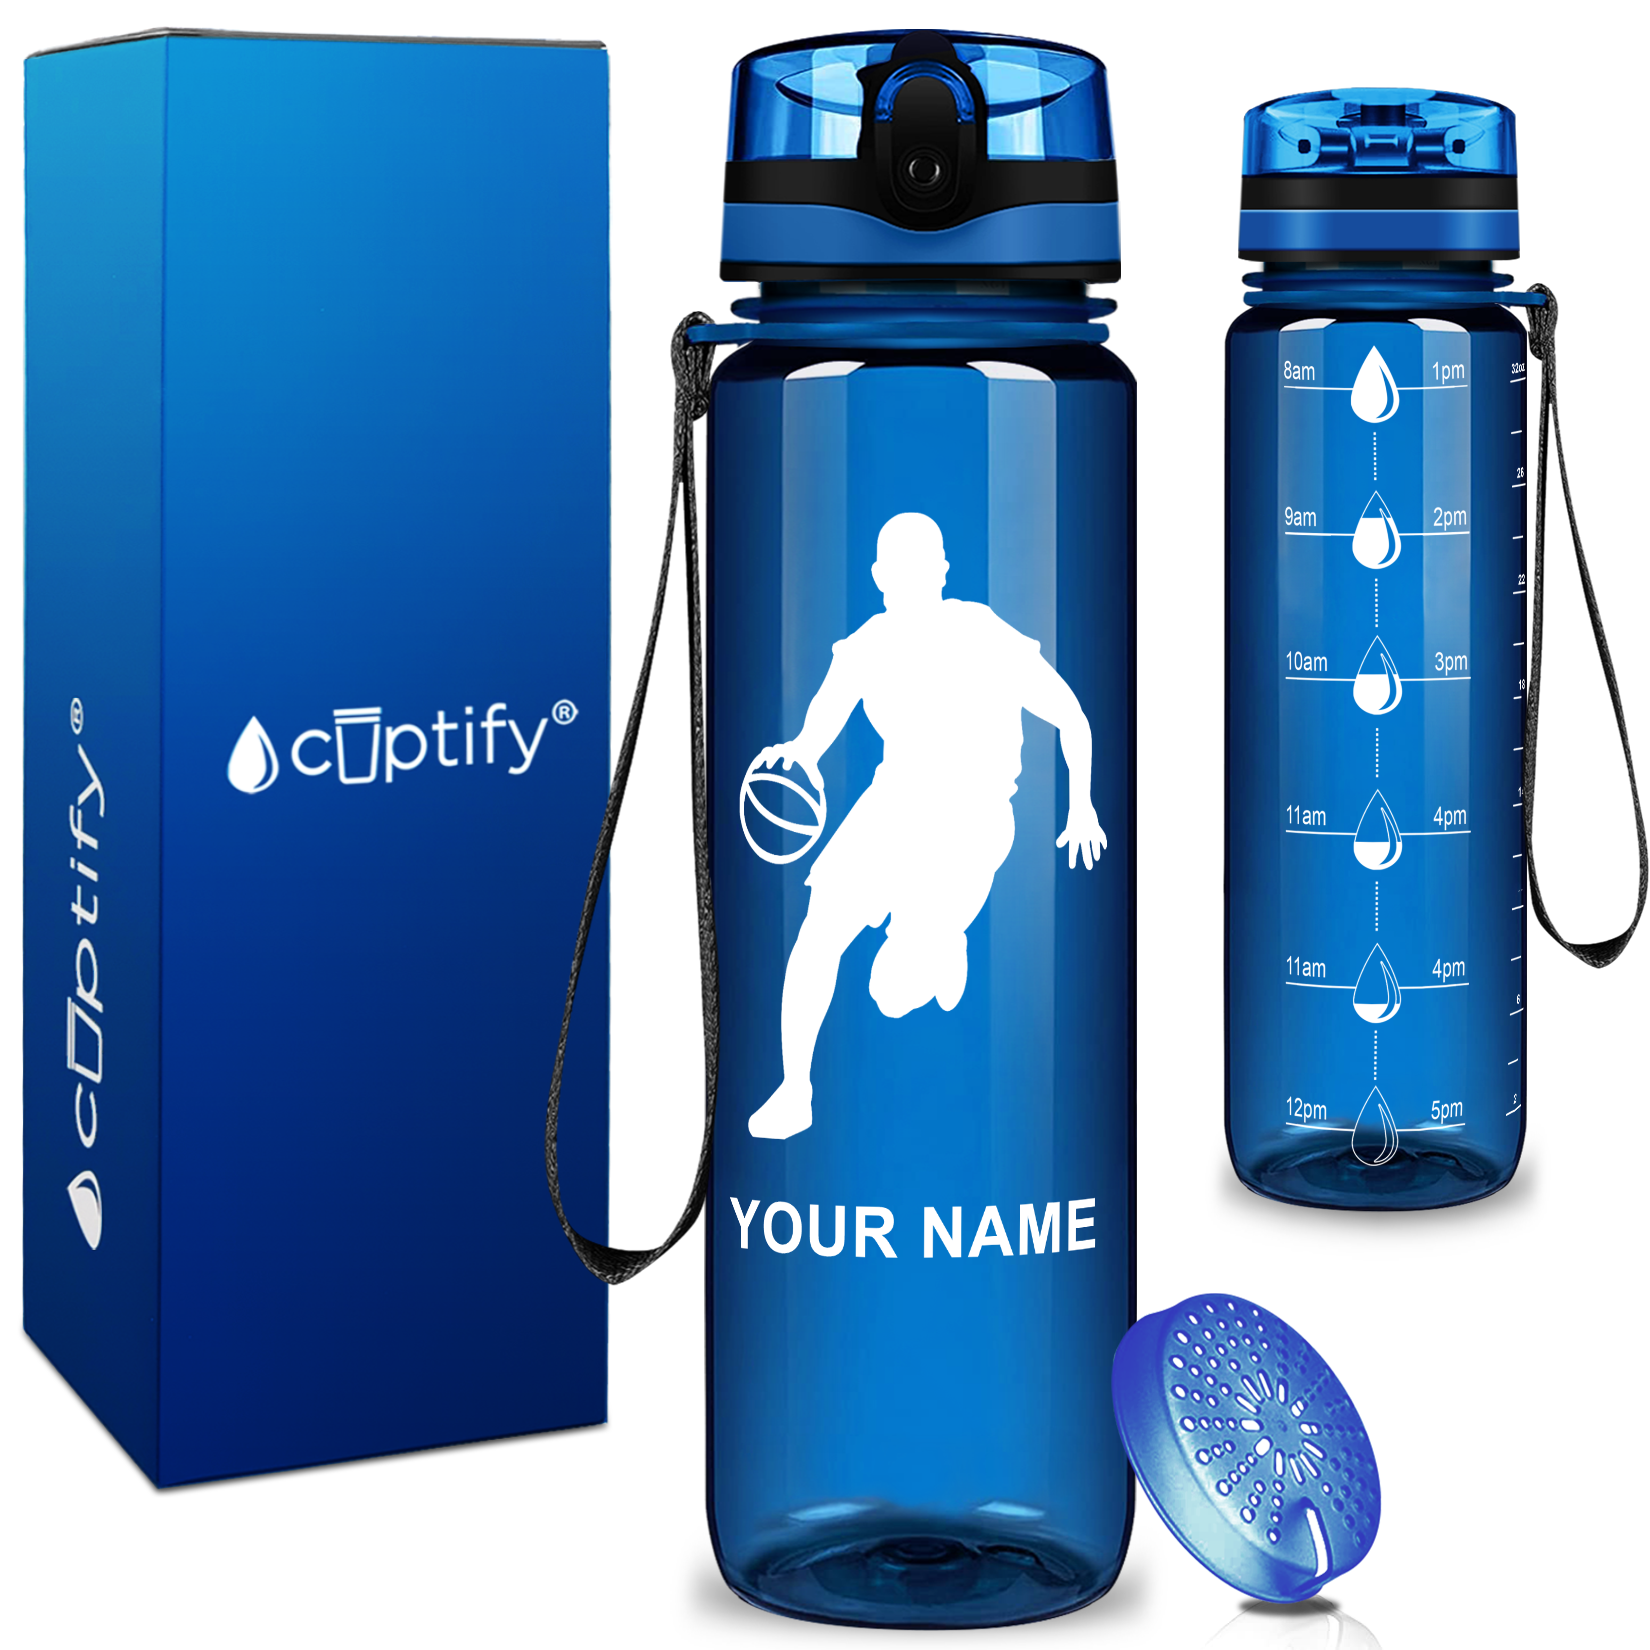 Personalized Basketball Player Silhouette on 32 oz Motivational Tracking Water Bottle